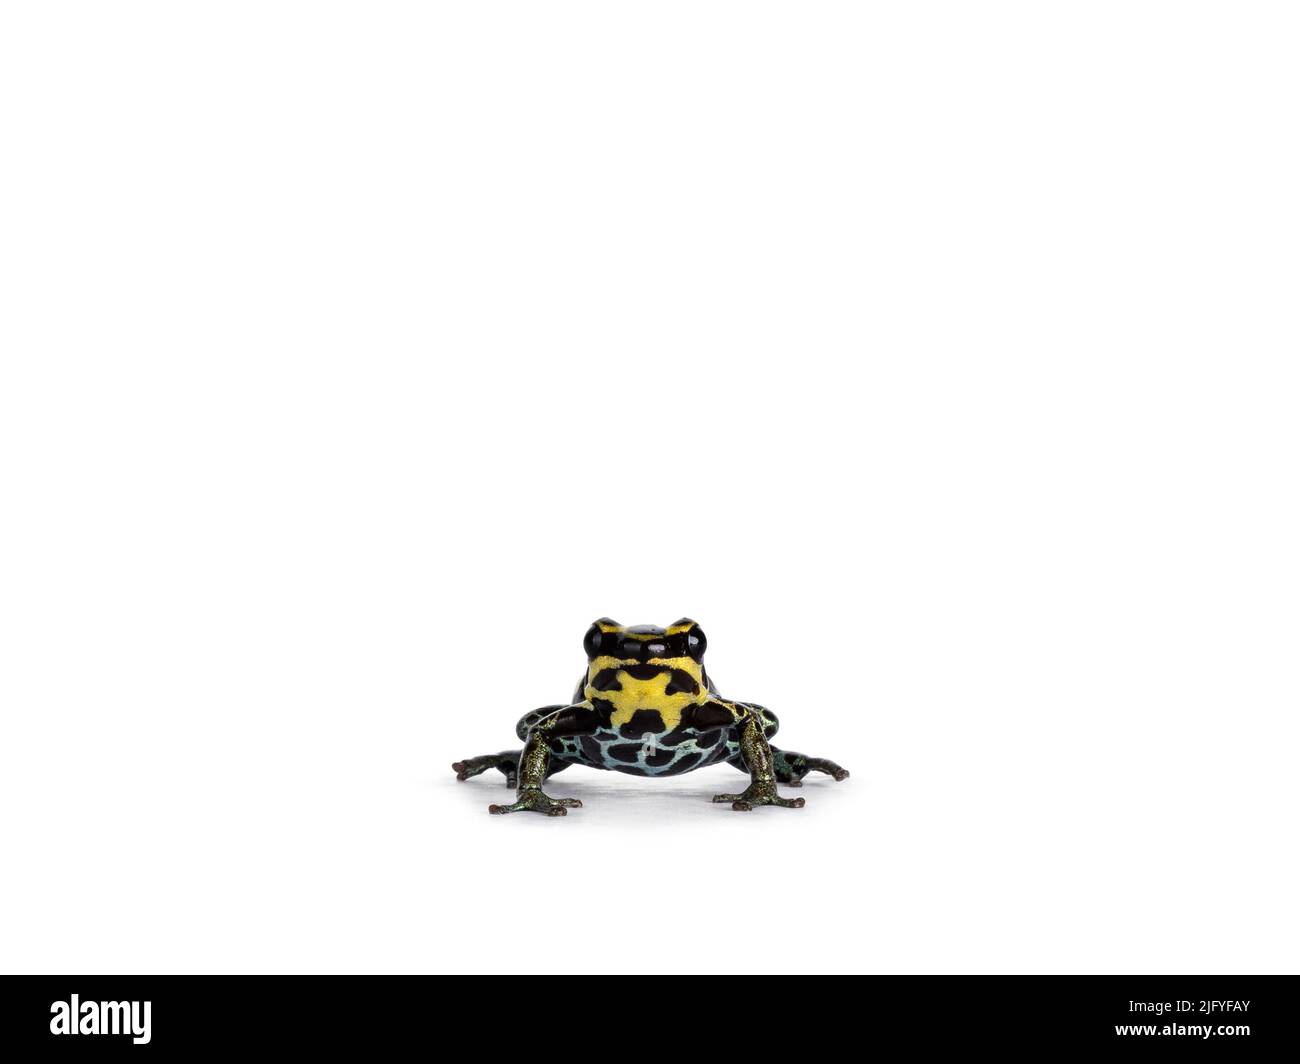 Tiny ranitomeya ventrimaculata aka reticulated poison frog sitting facing front. Isolated on a white background. Stock Photo